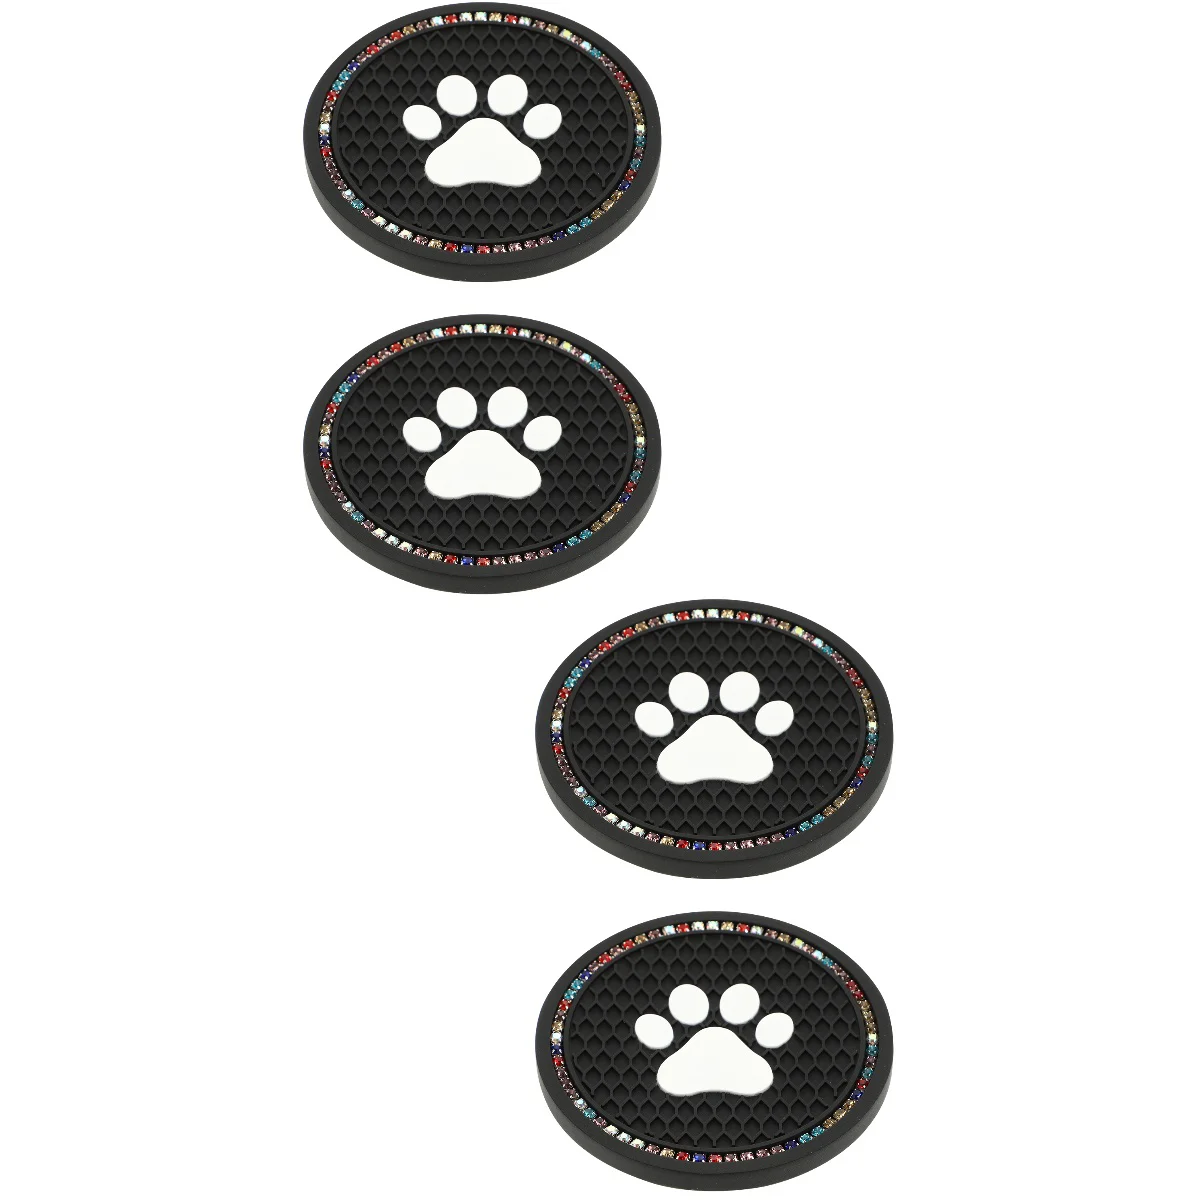 

4 Pcs Coaster Diamond Claw Pattern Cup Mat Lovely Coasters Your Car Absorbent Household